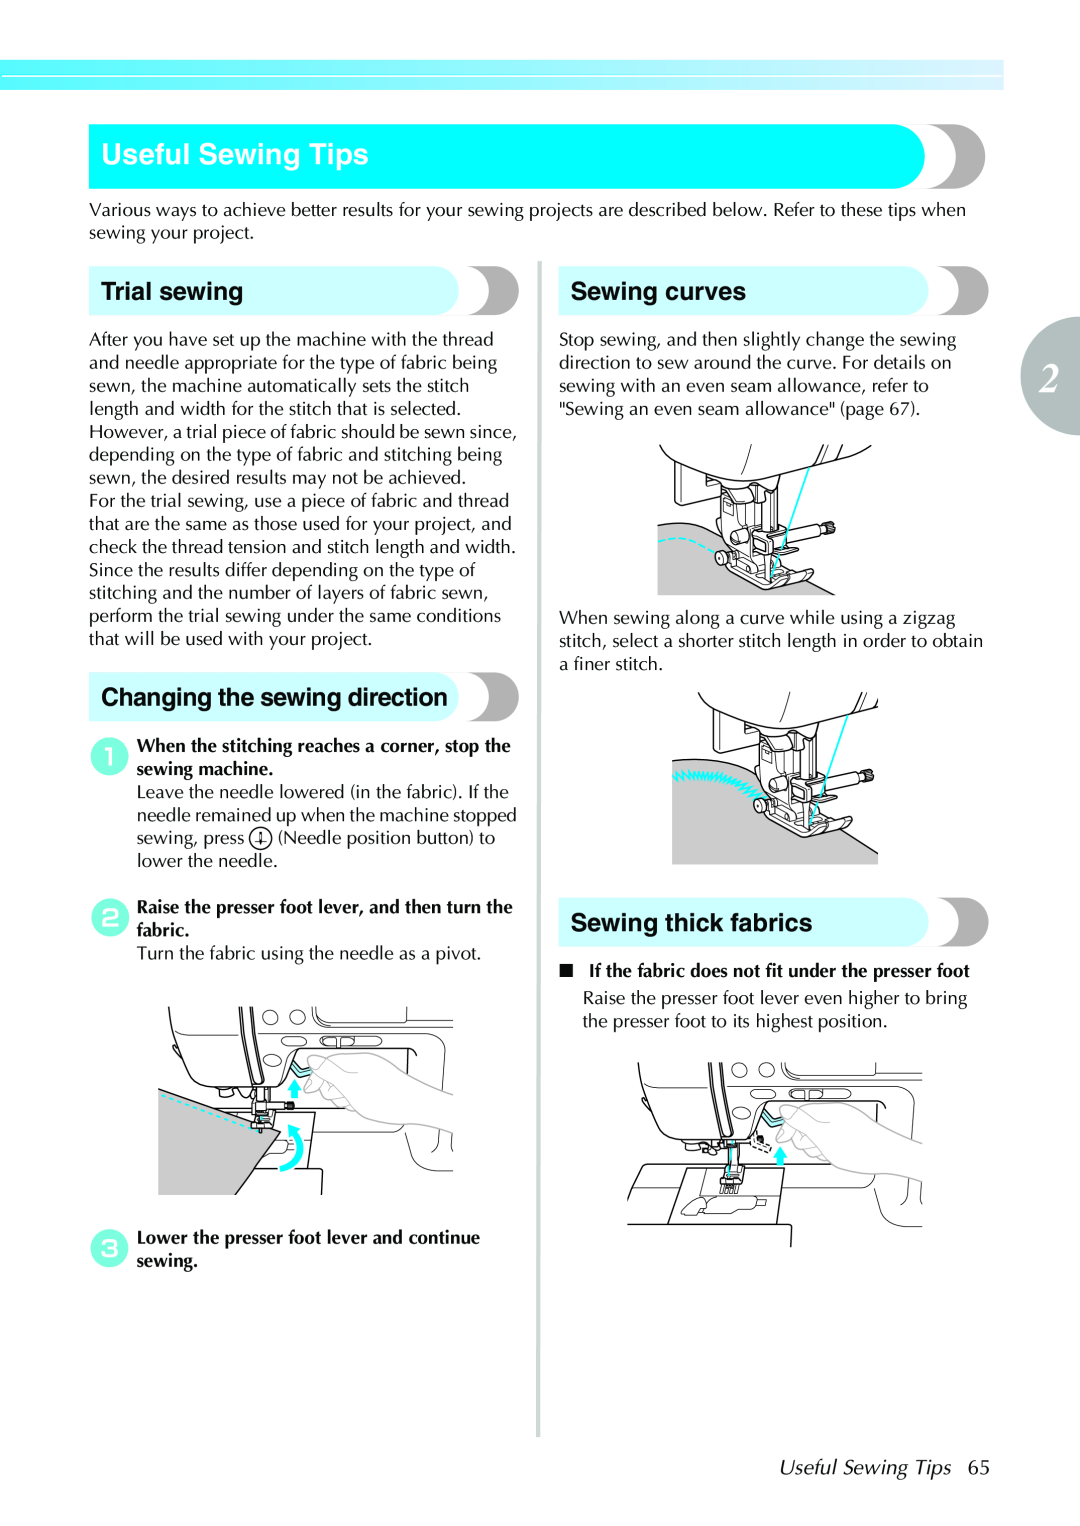 Brother 885-V31 Useful Sewing Tips, Trial sewing, Changing the sewing direction, Sewing curves, Sewing thick fabrics 